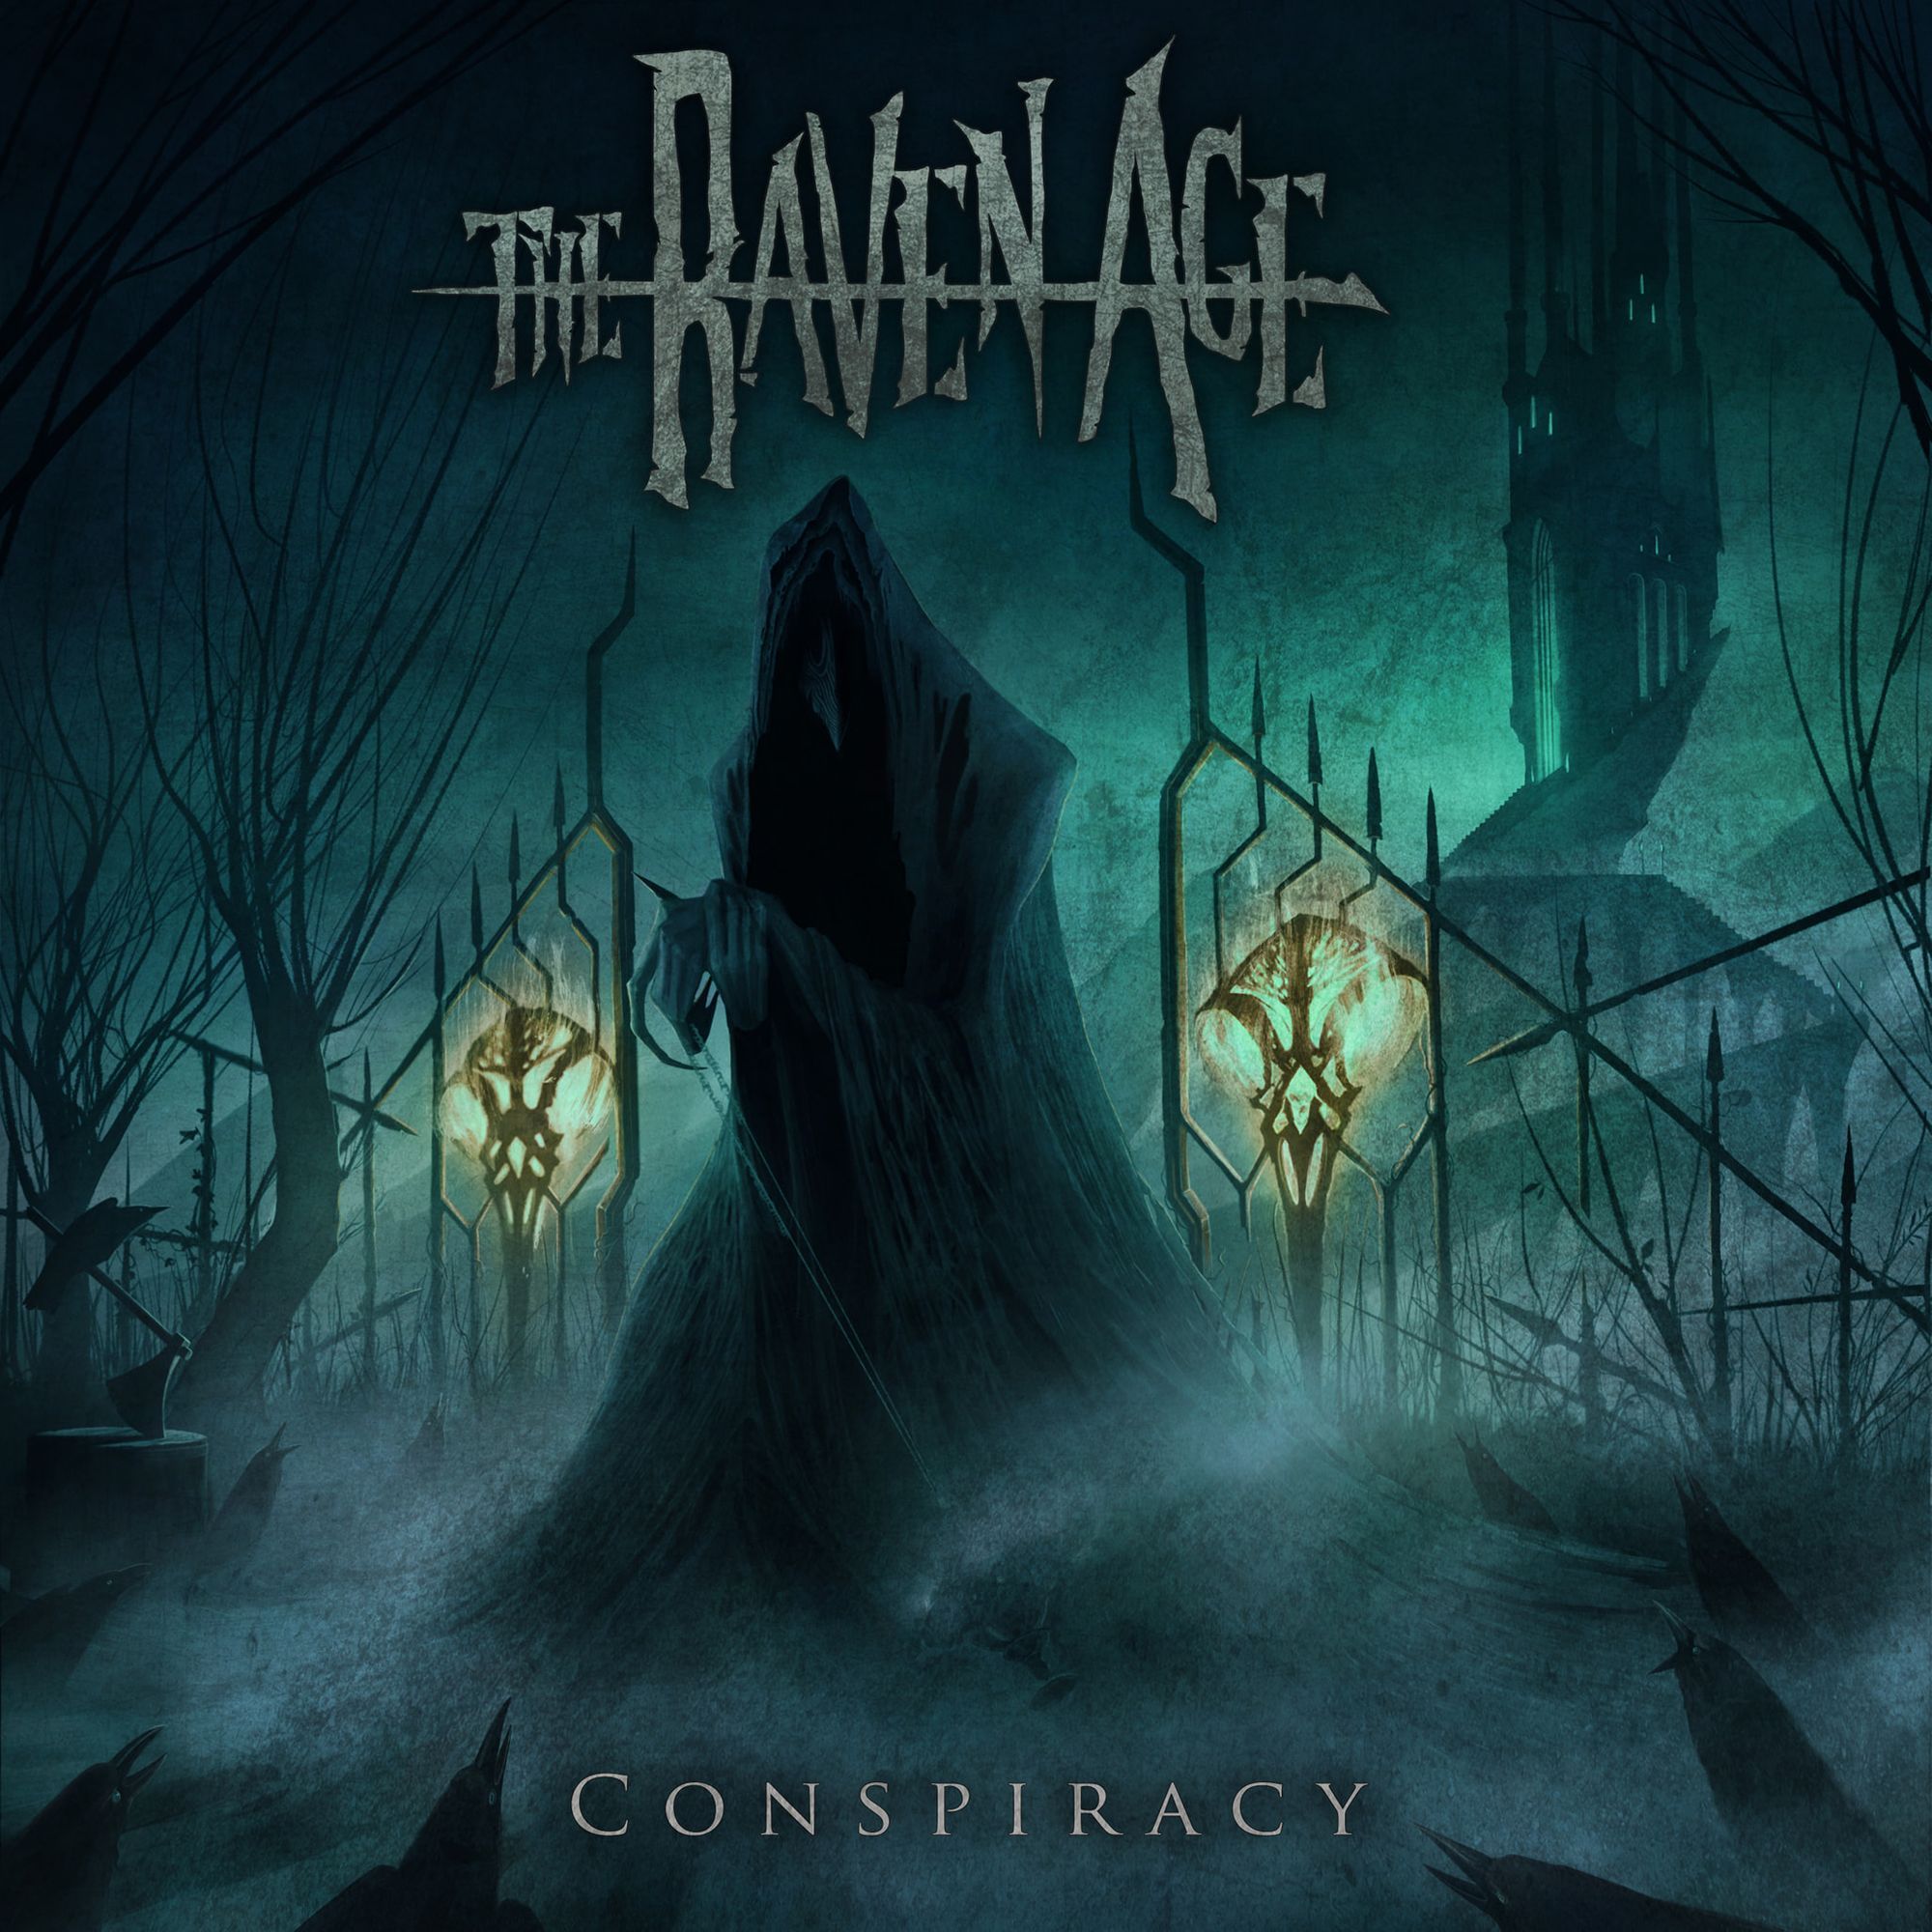 The Raven Age - The Day the World Stood Still (audio)